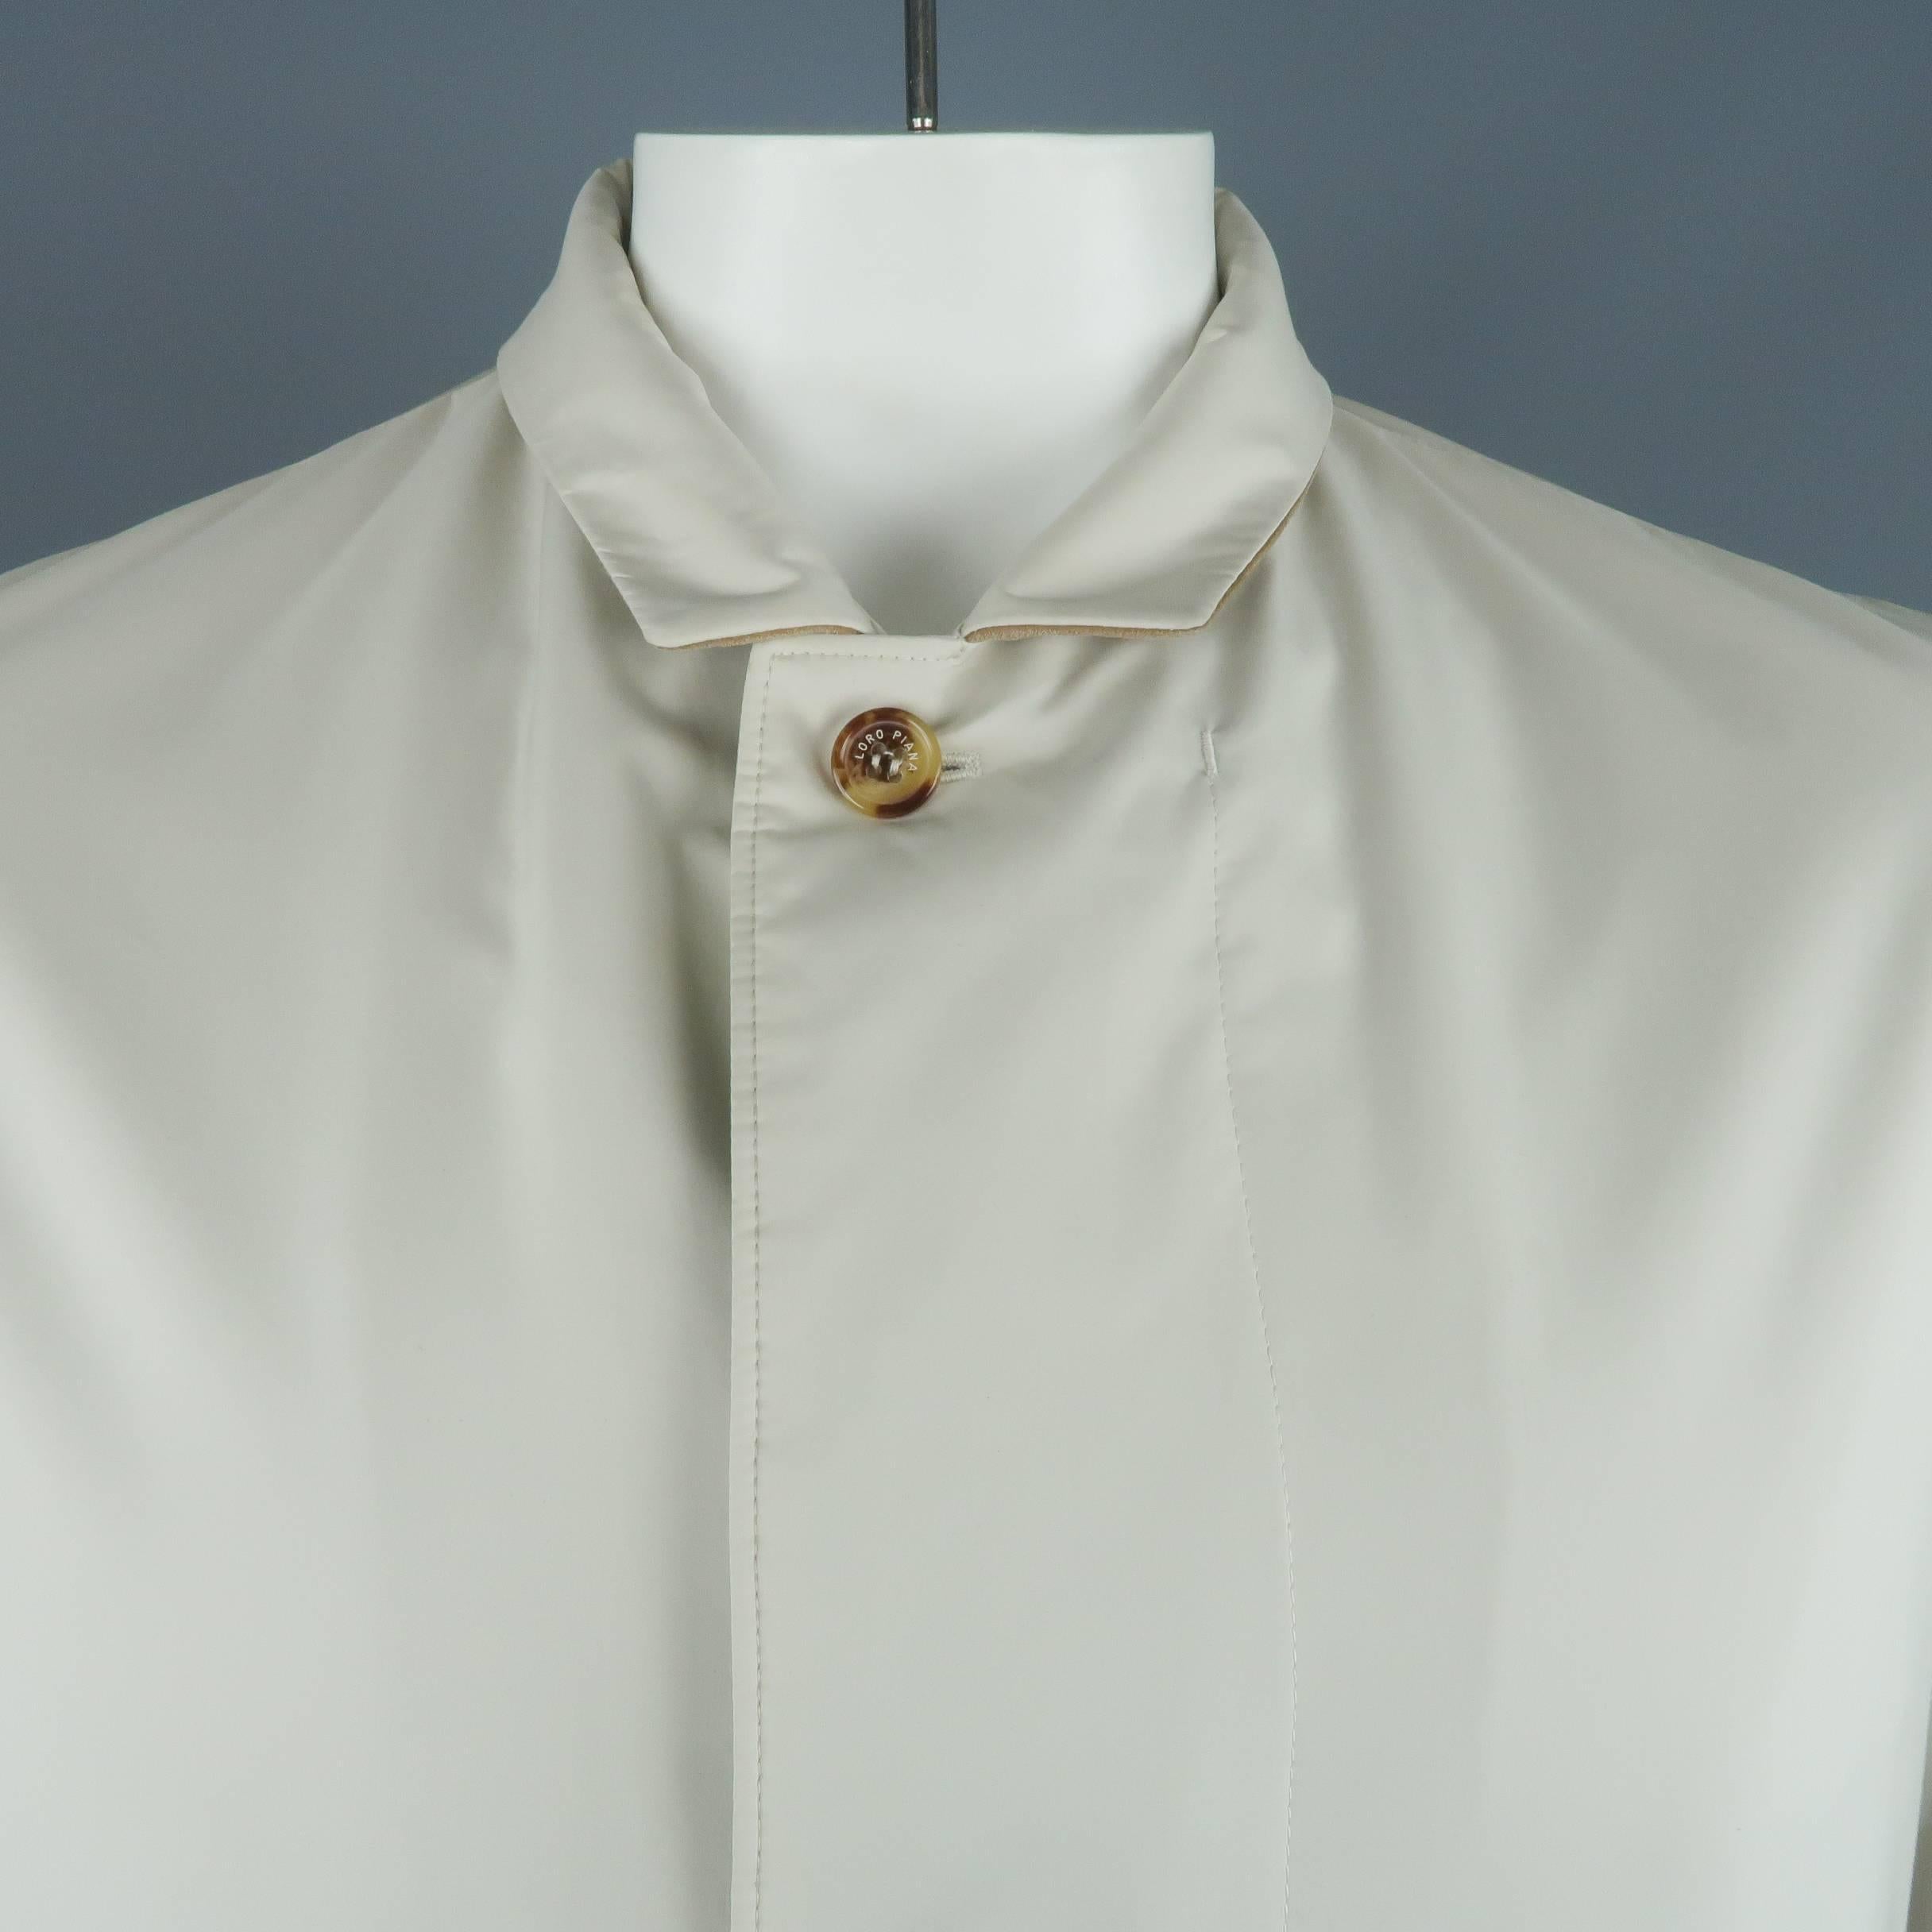 LORO PIANA car coat comes in khaki fabric with a small collar lined in tan suede, double zip front with buttoned placket, slanted pockets, and cashmere liner. Made in Italy.
 
Good Pre-Owned Condition.
Marked: M
 
Measurements:
 
Shoulder: 18